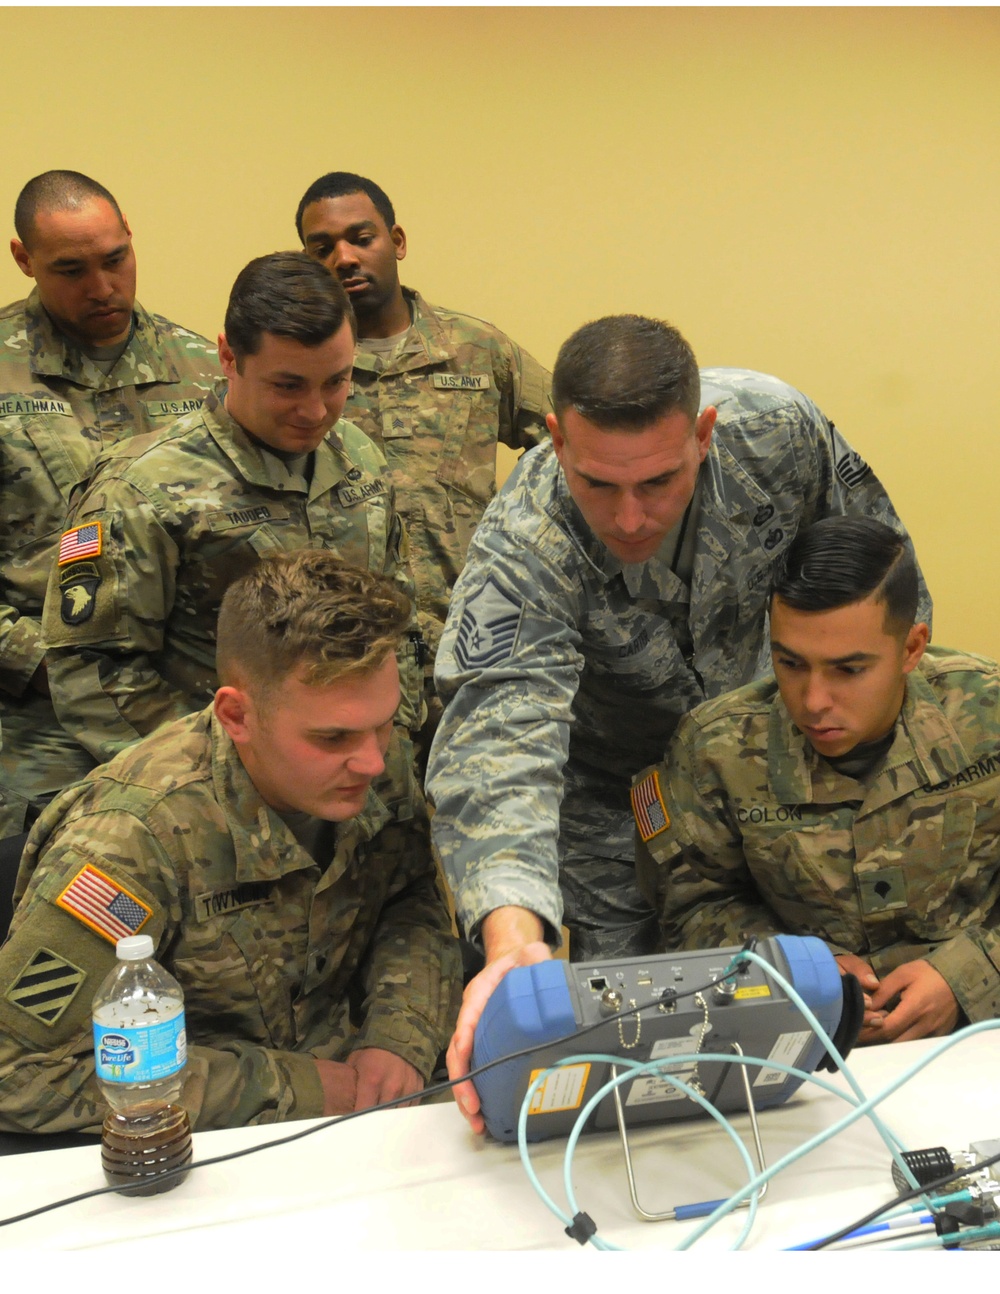 3ABCT Soldiers hone signal skills